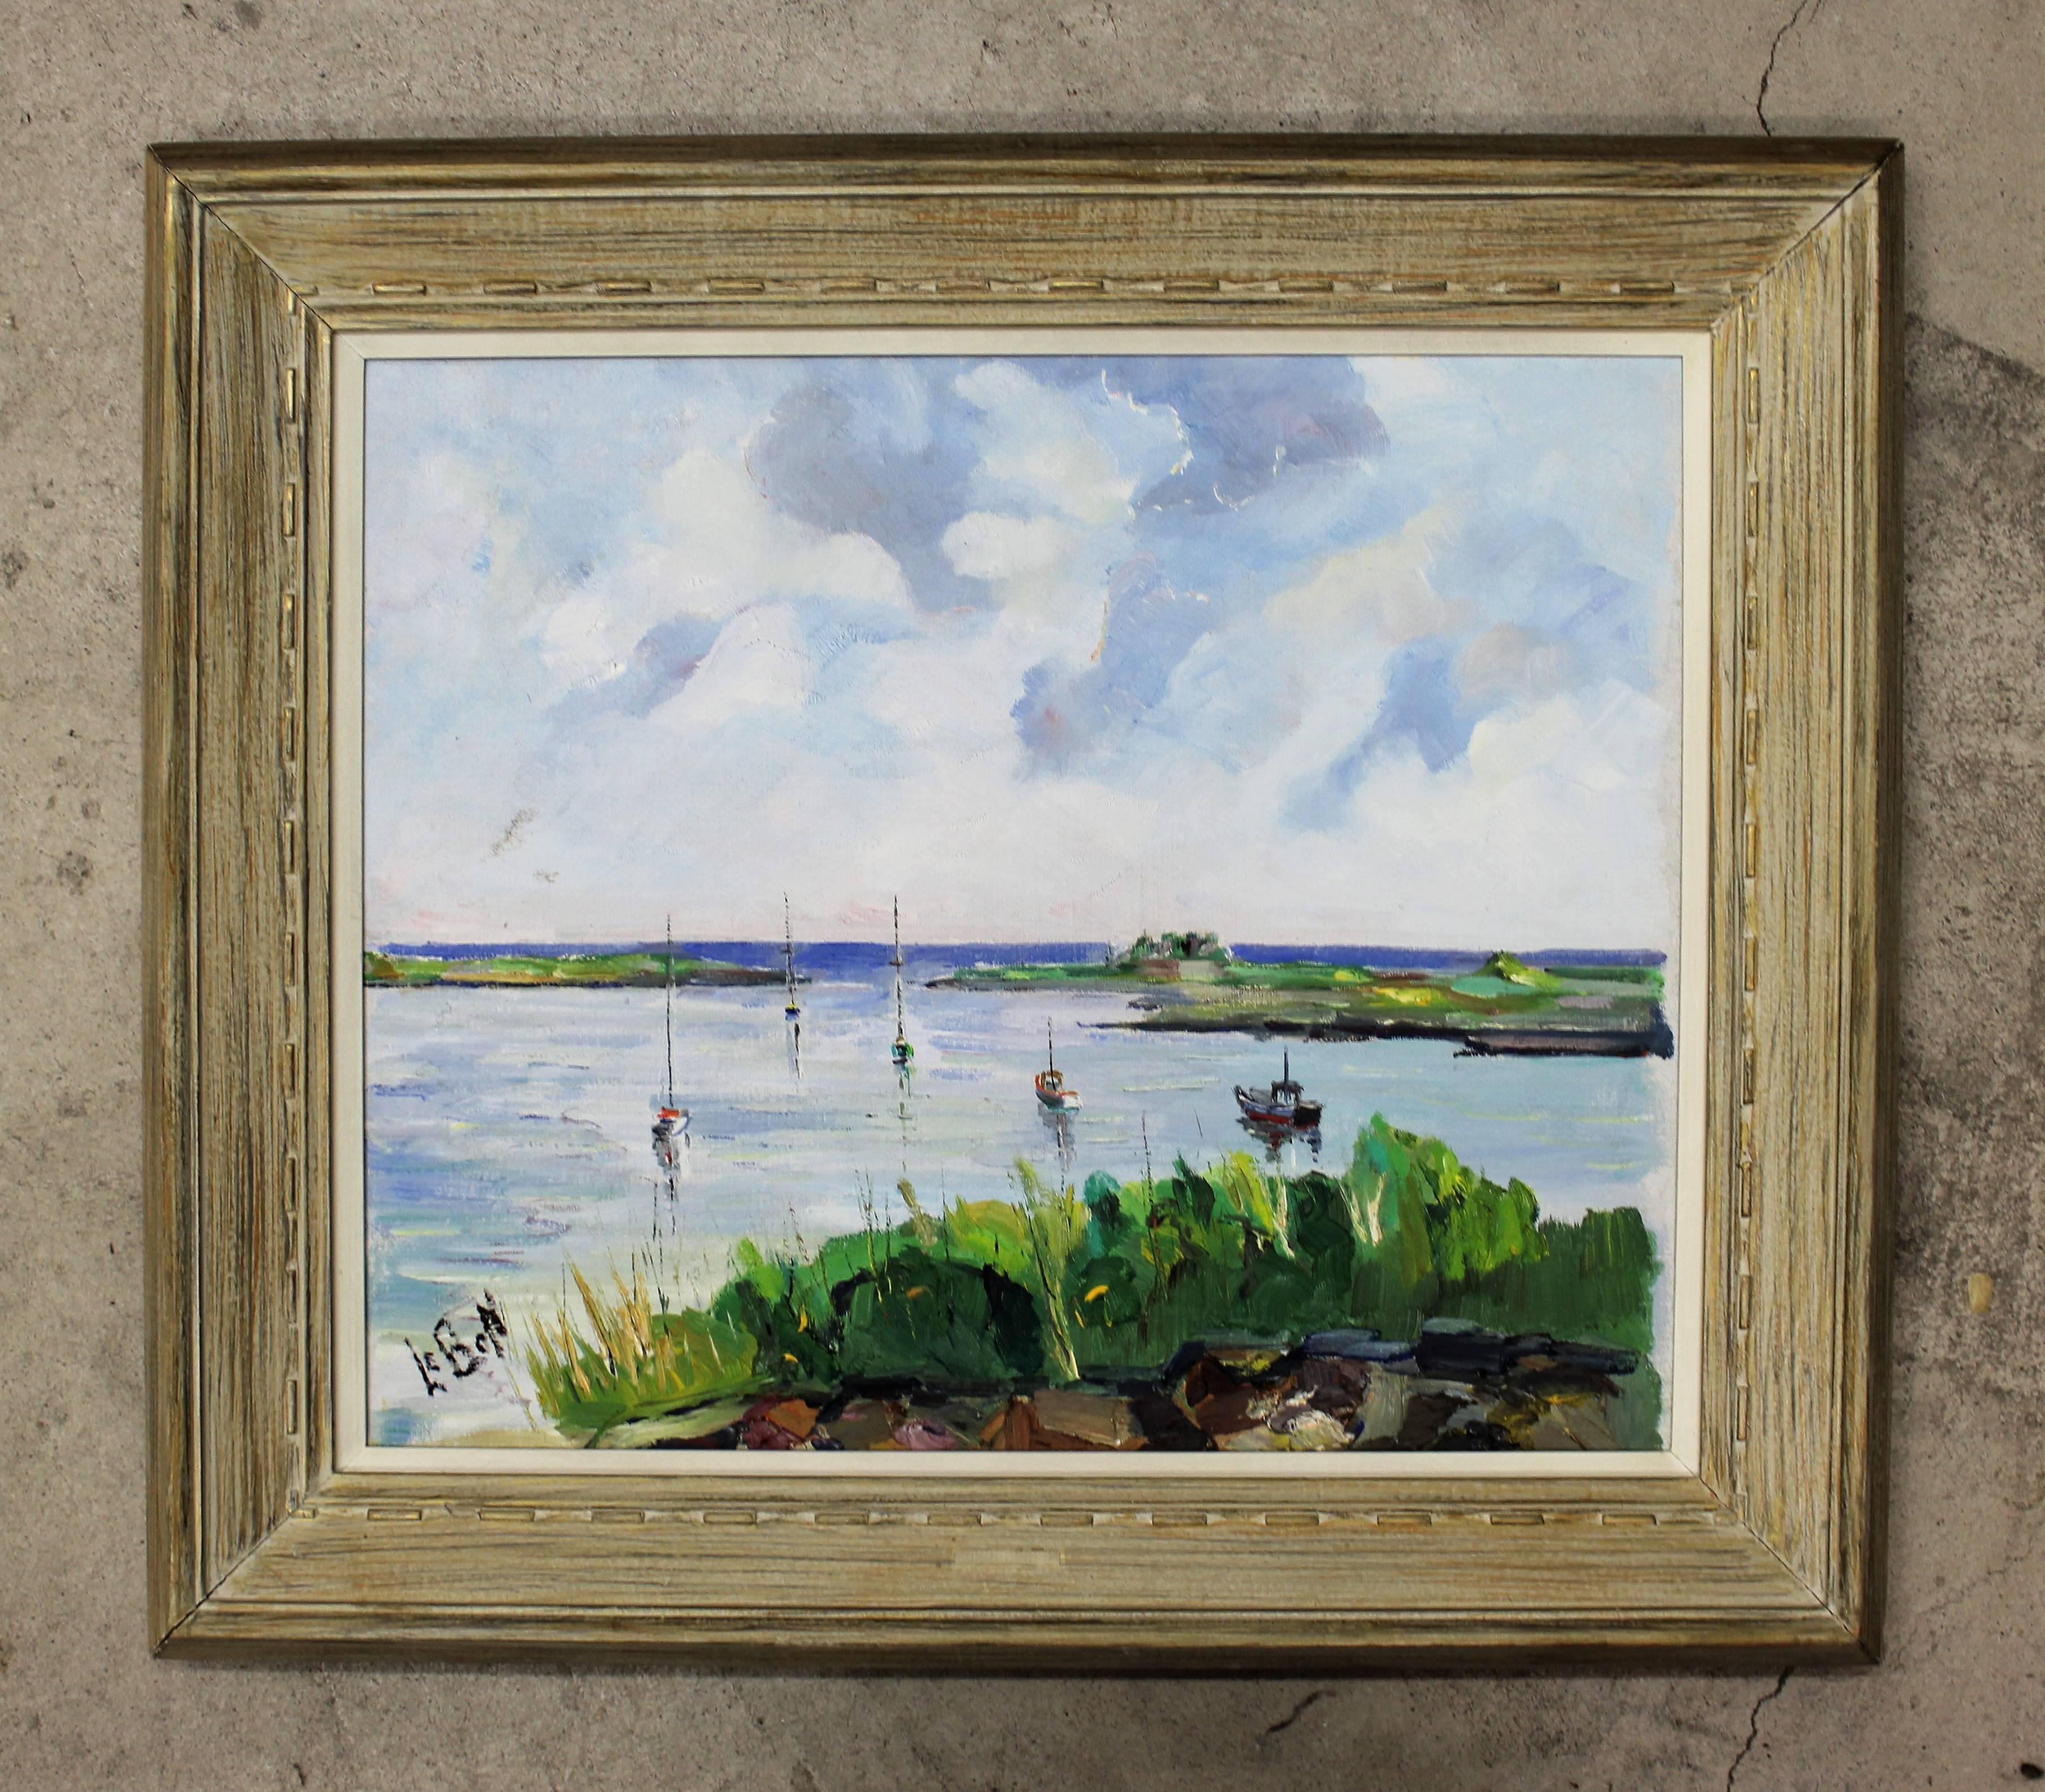 Maurice LeBon (Canadian 1916-1998)
Oil on board.
Measures: With frame 32" wide x 27" high
Without frame 24" wide x 20" high.
    